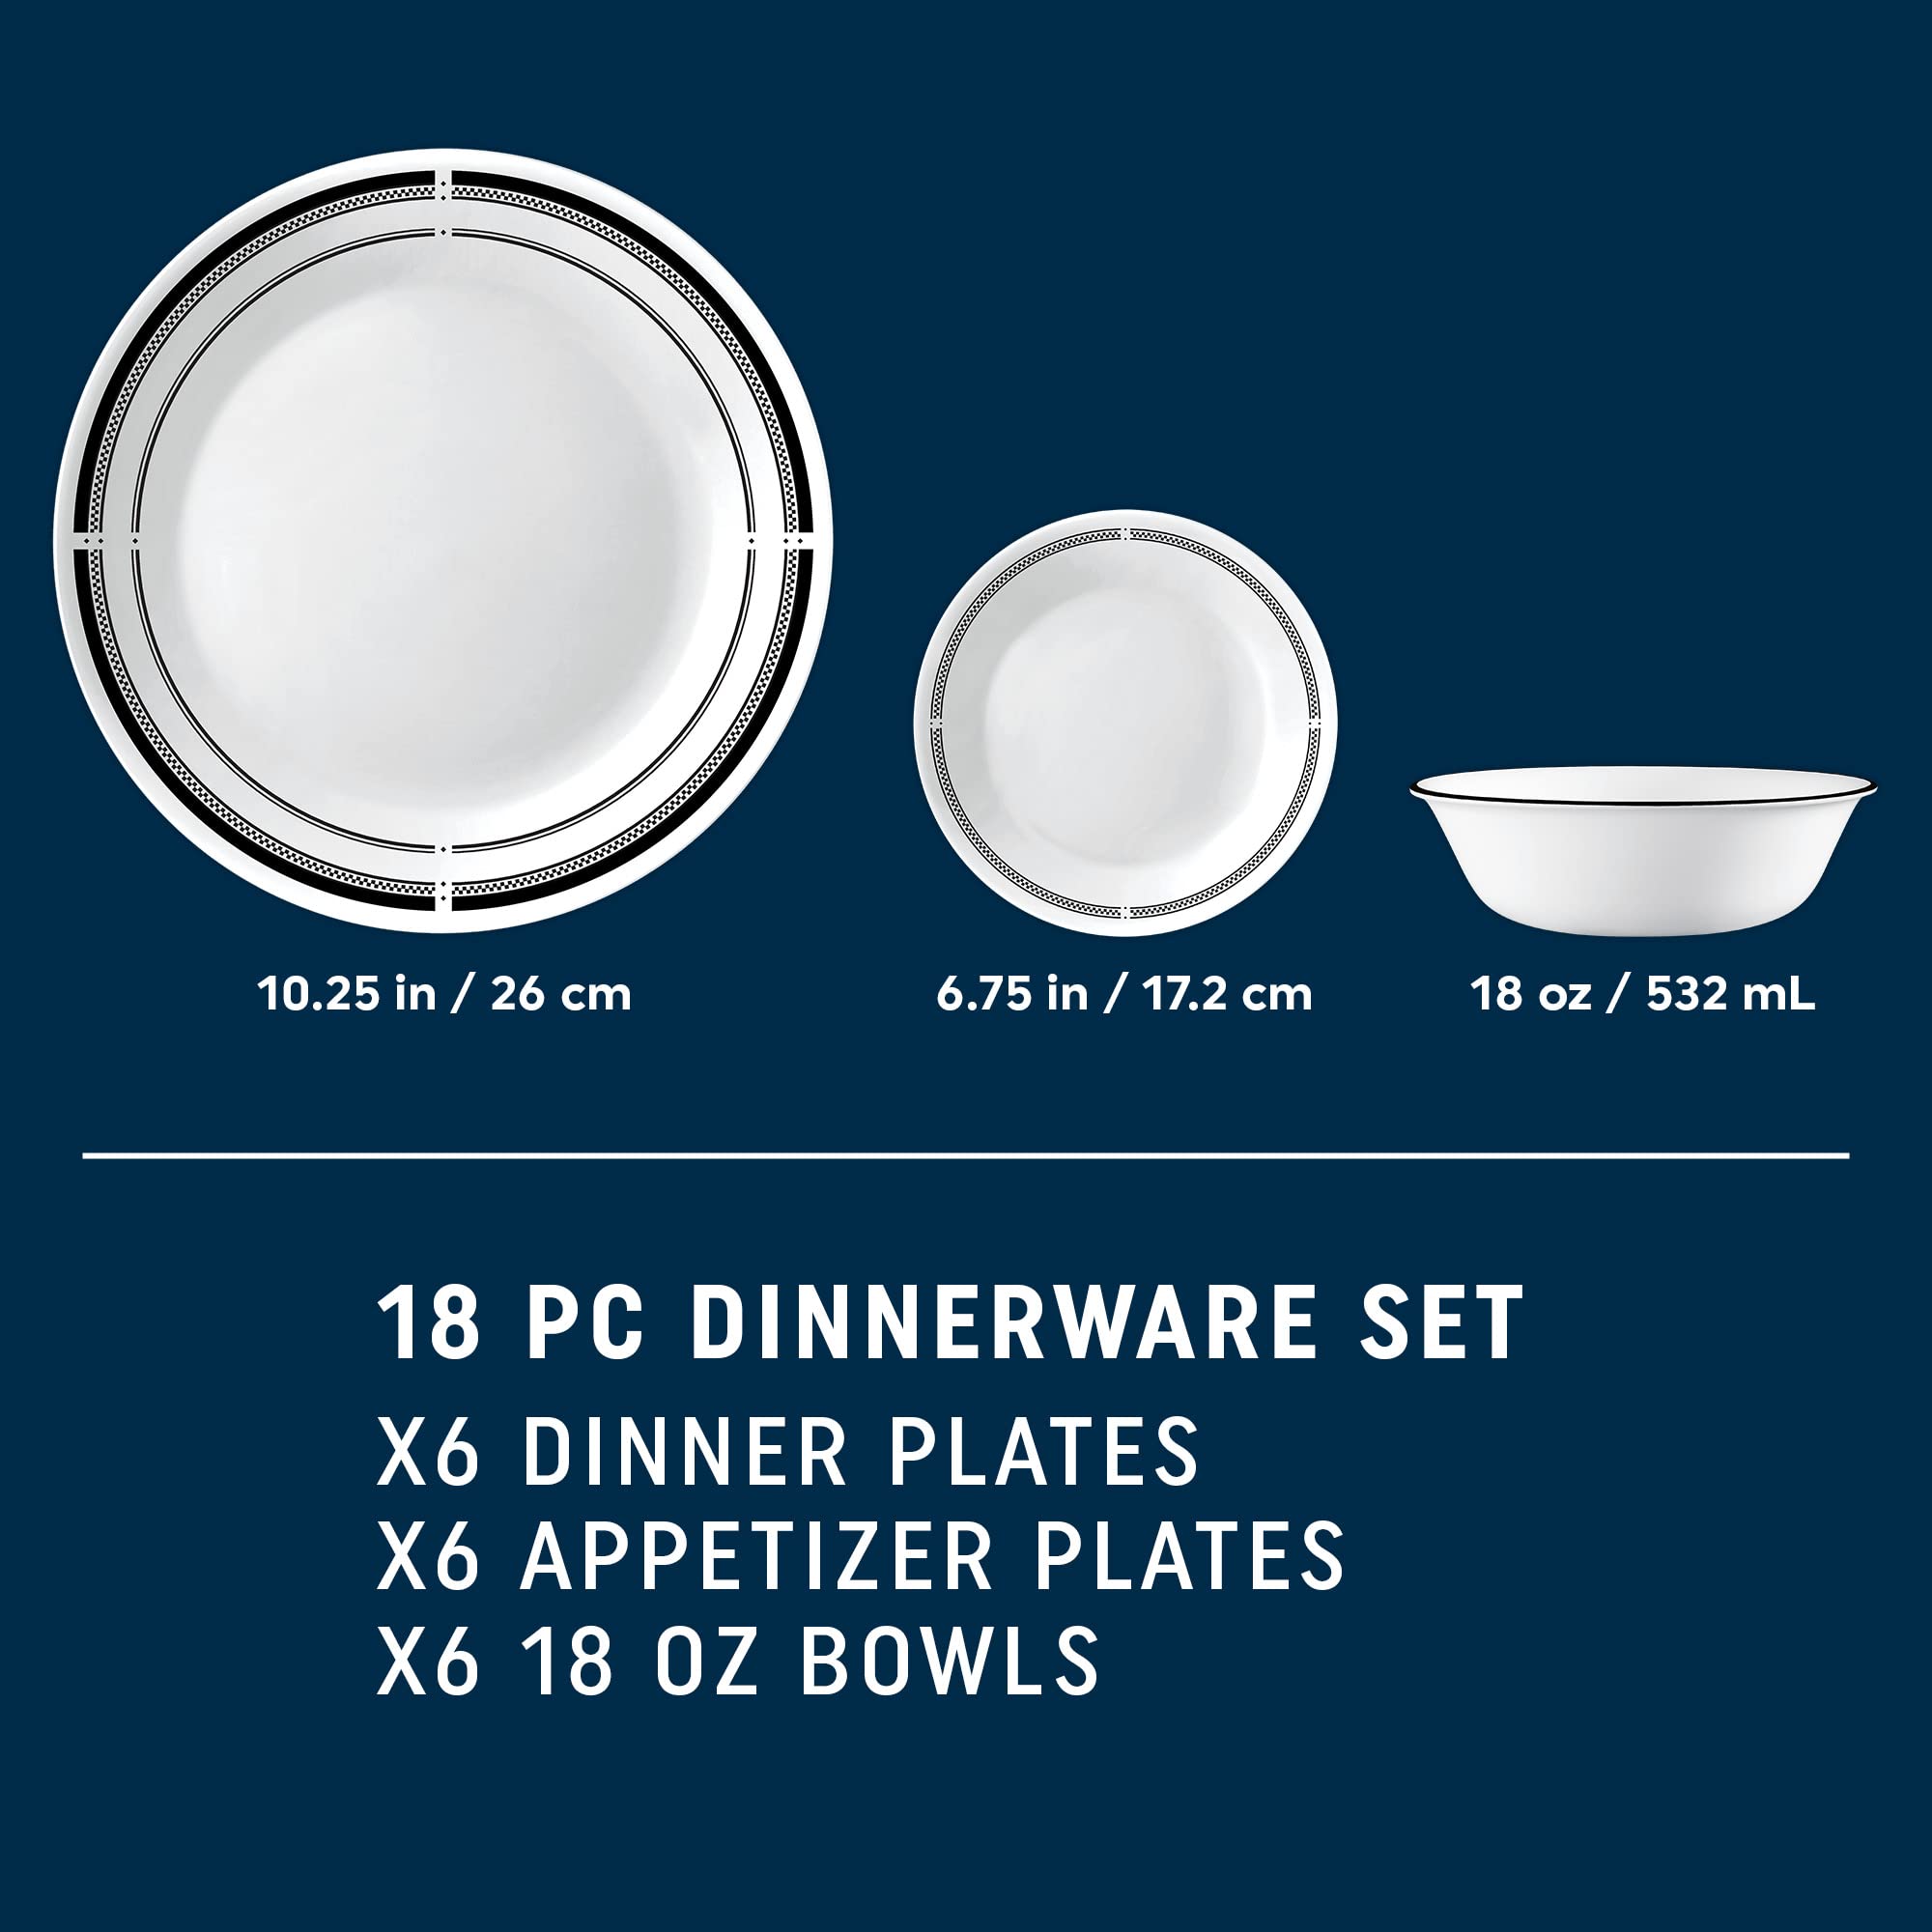 Corelle 18-Piece Round Dinnerware Set, Service for 6, Lightweight Round Plates and Bowls Set, Vitrelle Triple Layer Glass, Chip and Scratch Resistant, Microwave and Dishwasher Safe, Brasserie